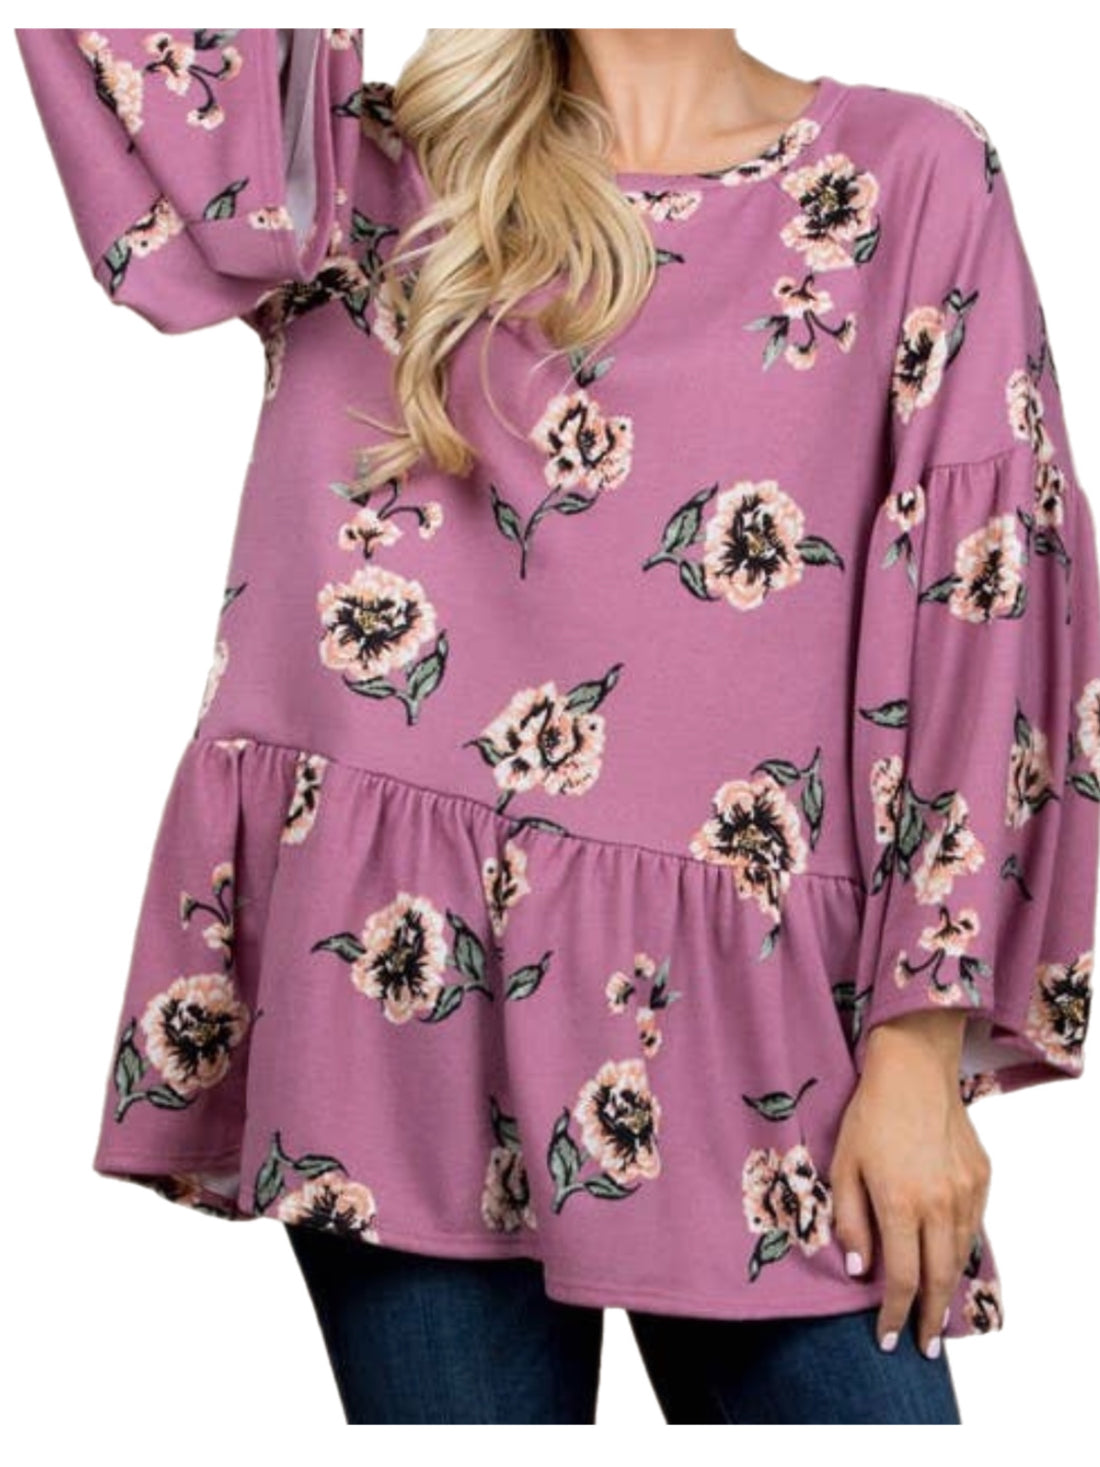 Mauve Floral Baby Doll Top w/ Bell Sleeves